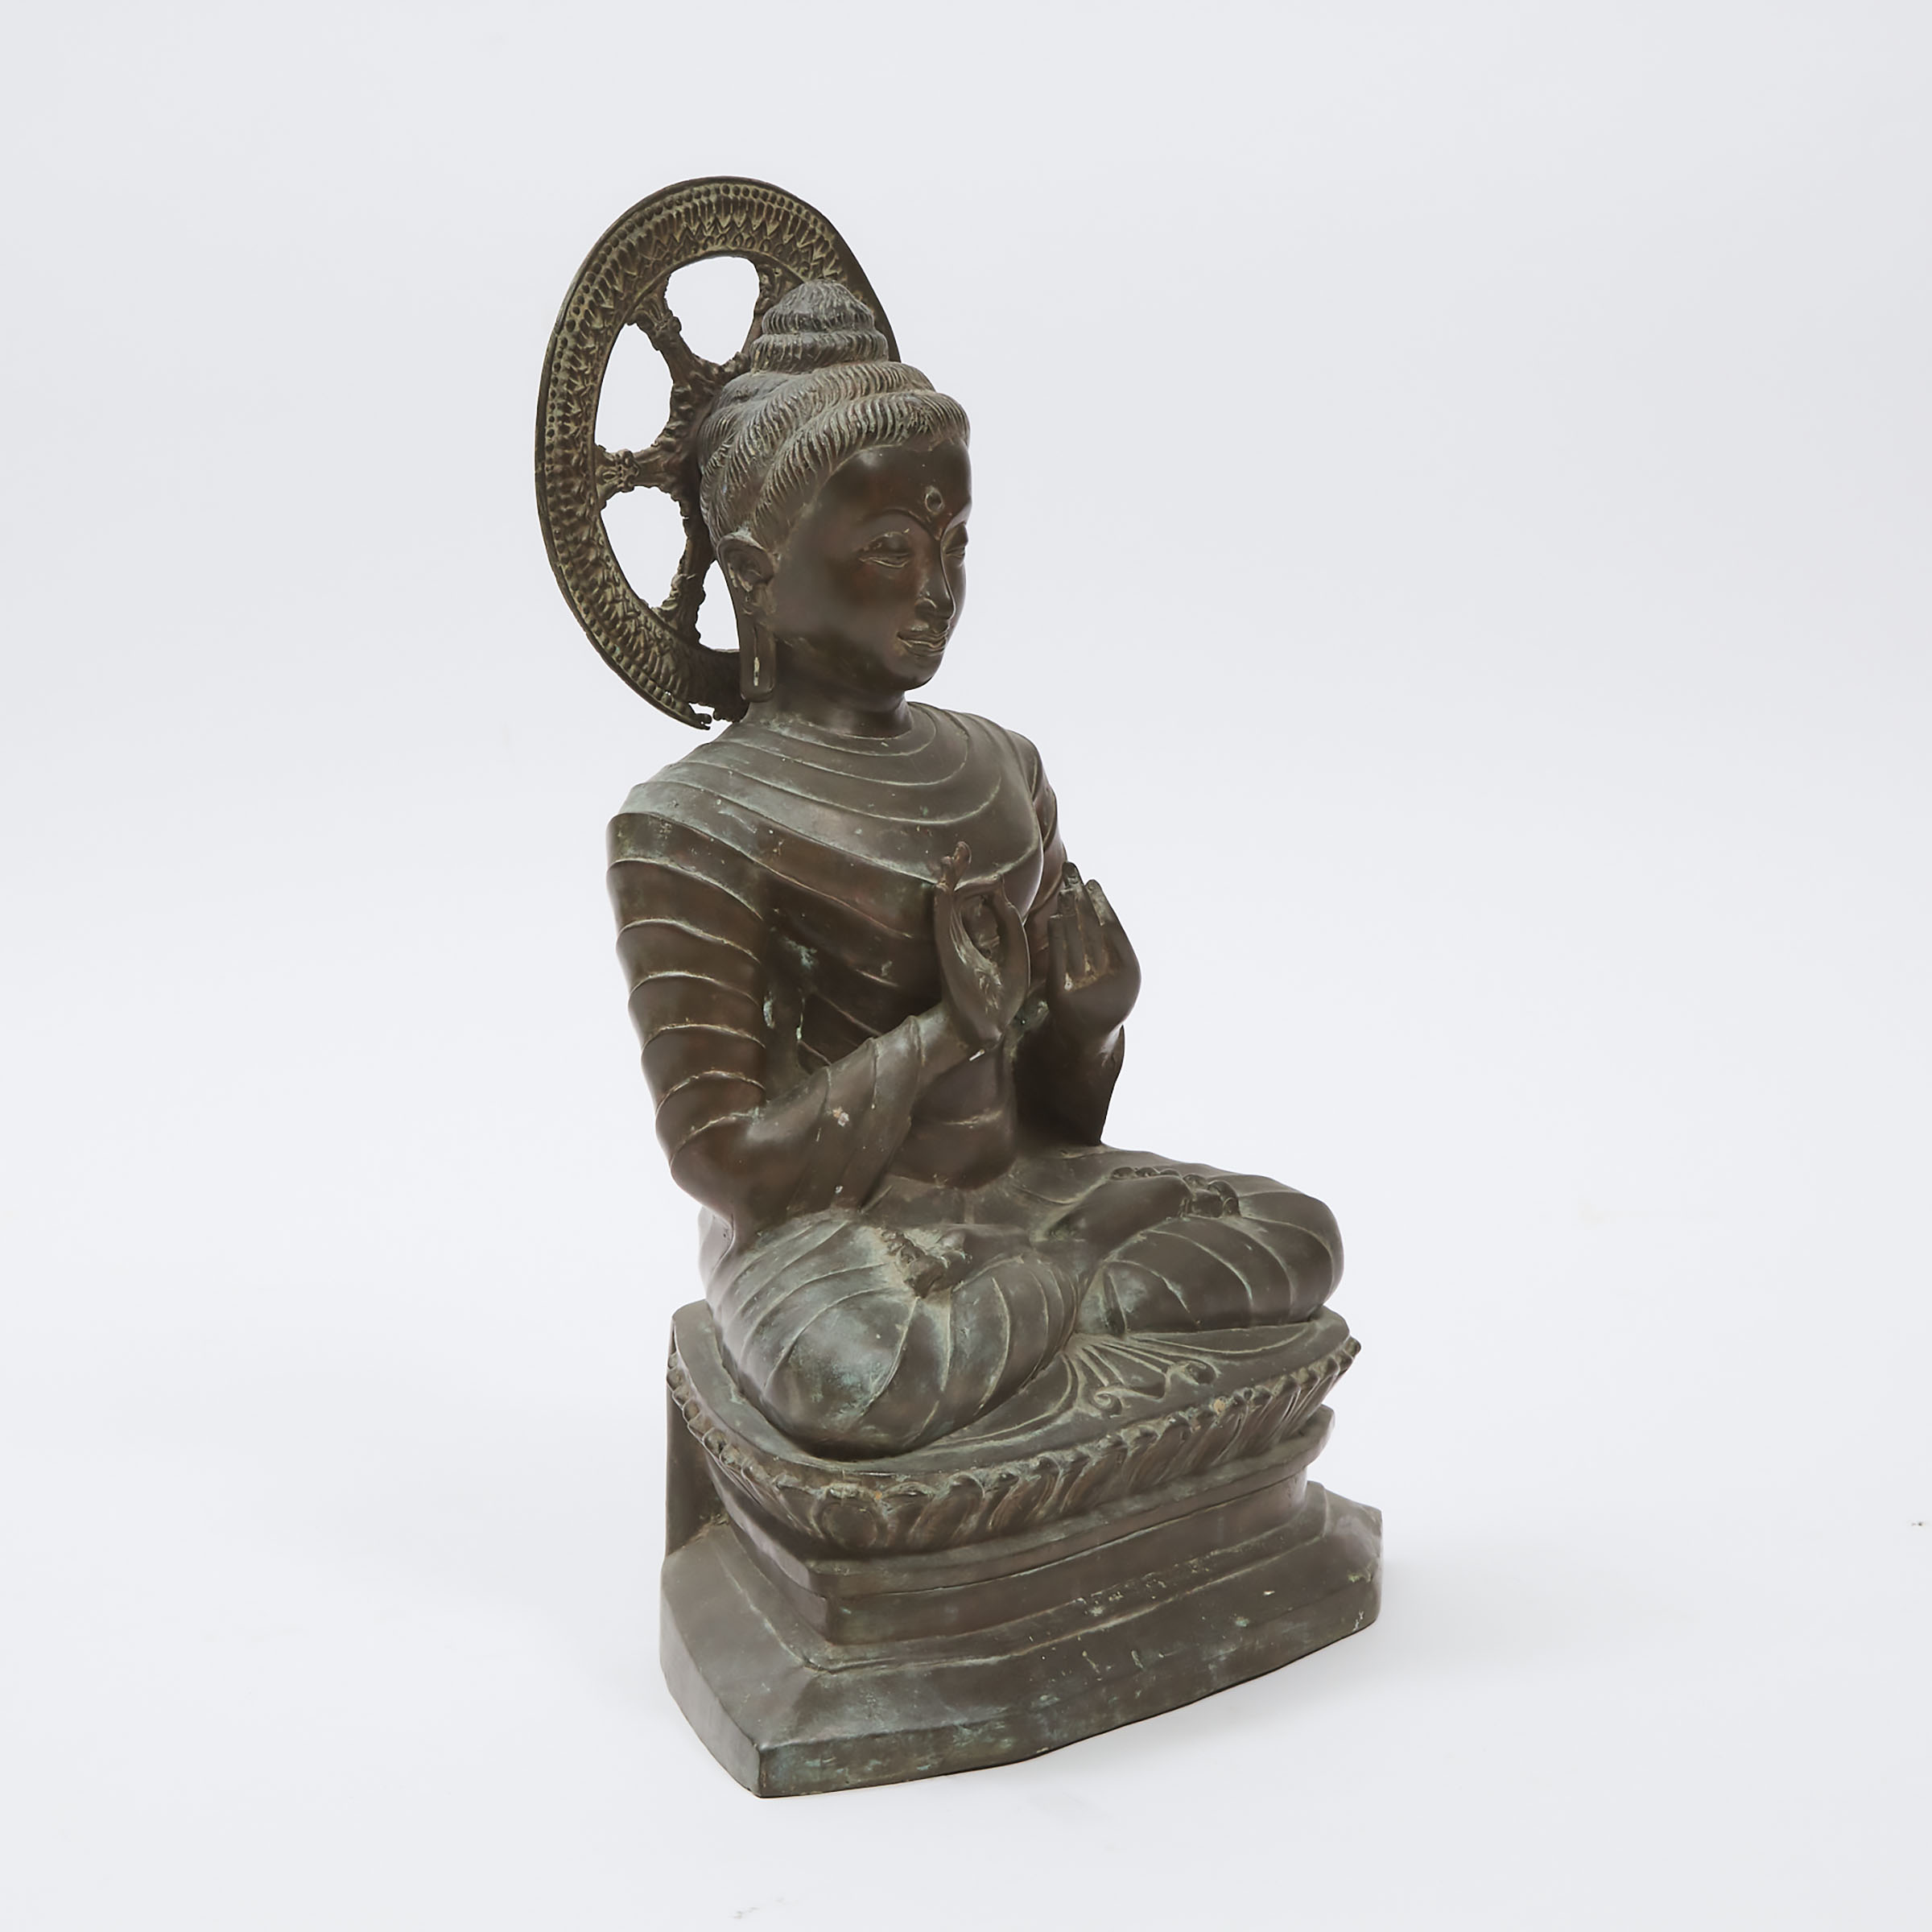 A Large Bronze Seated Figure of Buddha, Northern Thailand, 19th Century